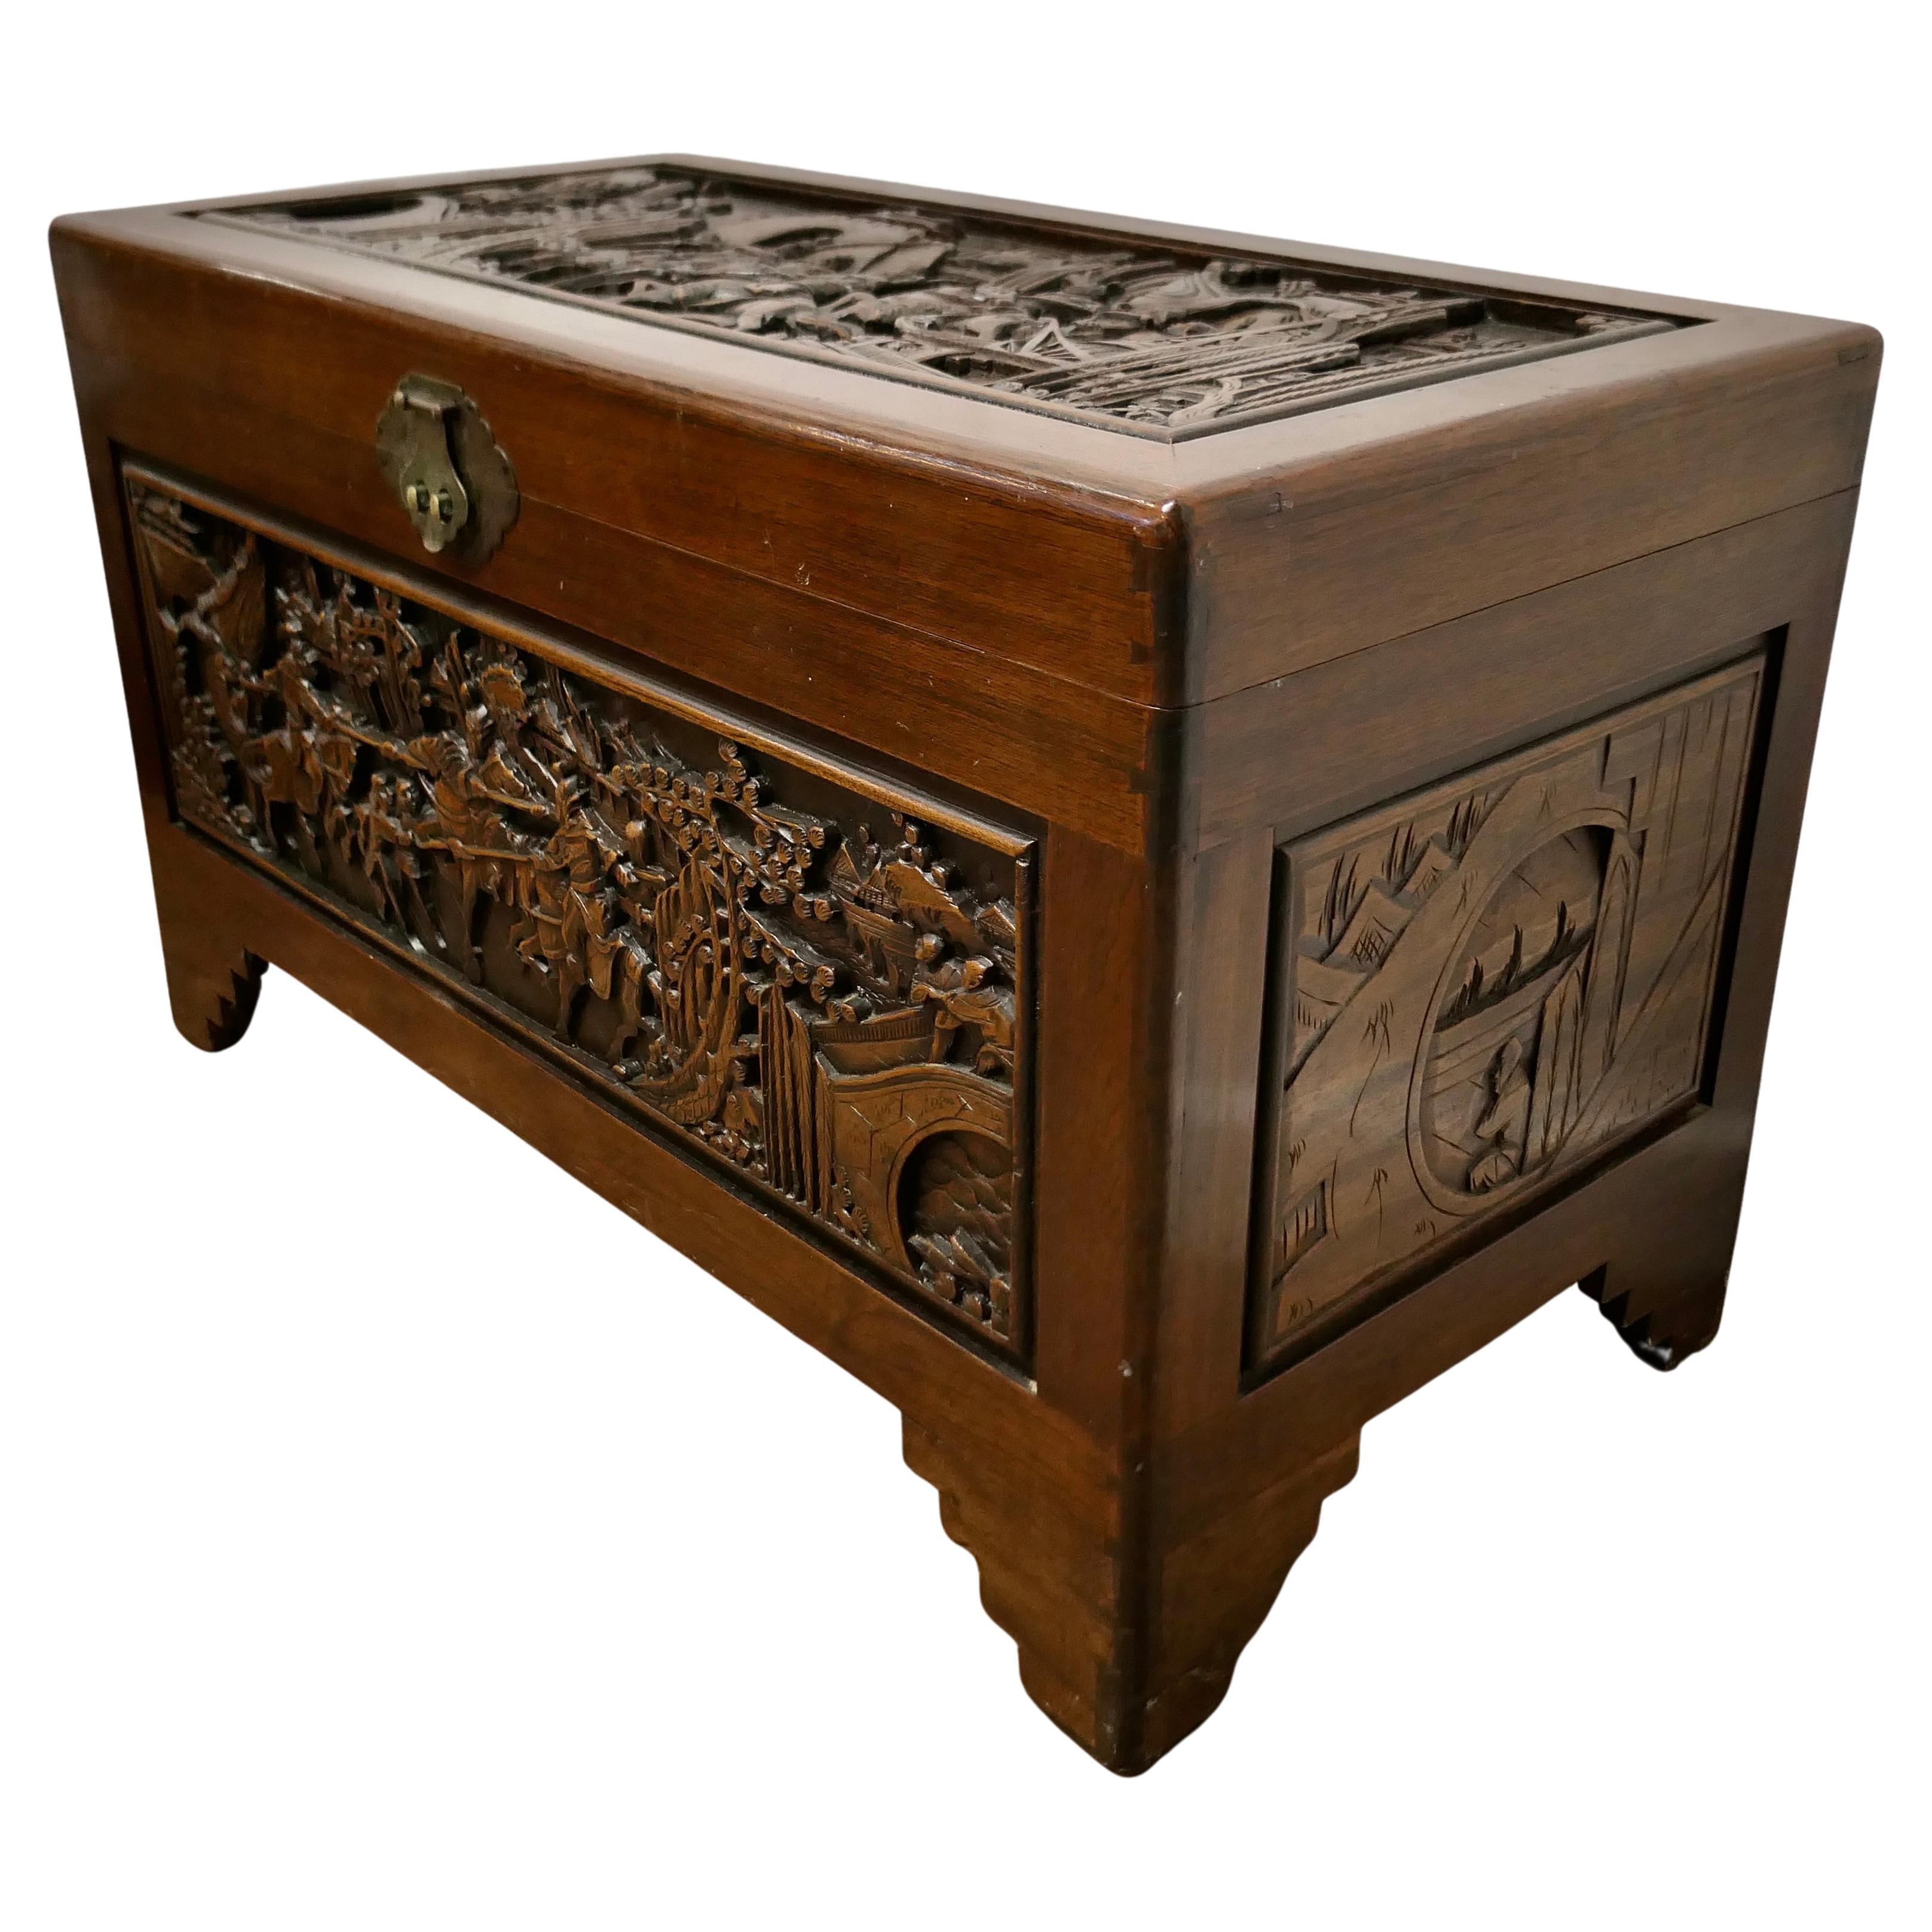 Large Carved Oriental Camphor Wood Chest This Carved Chest is Made from Camphor